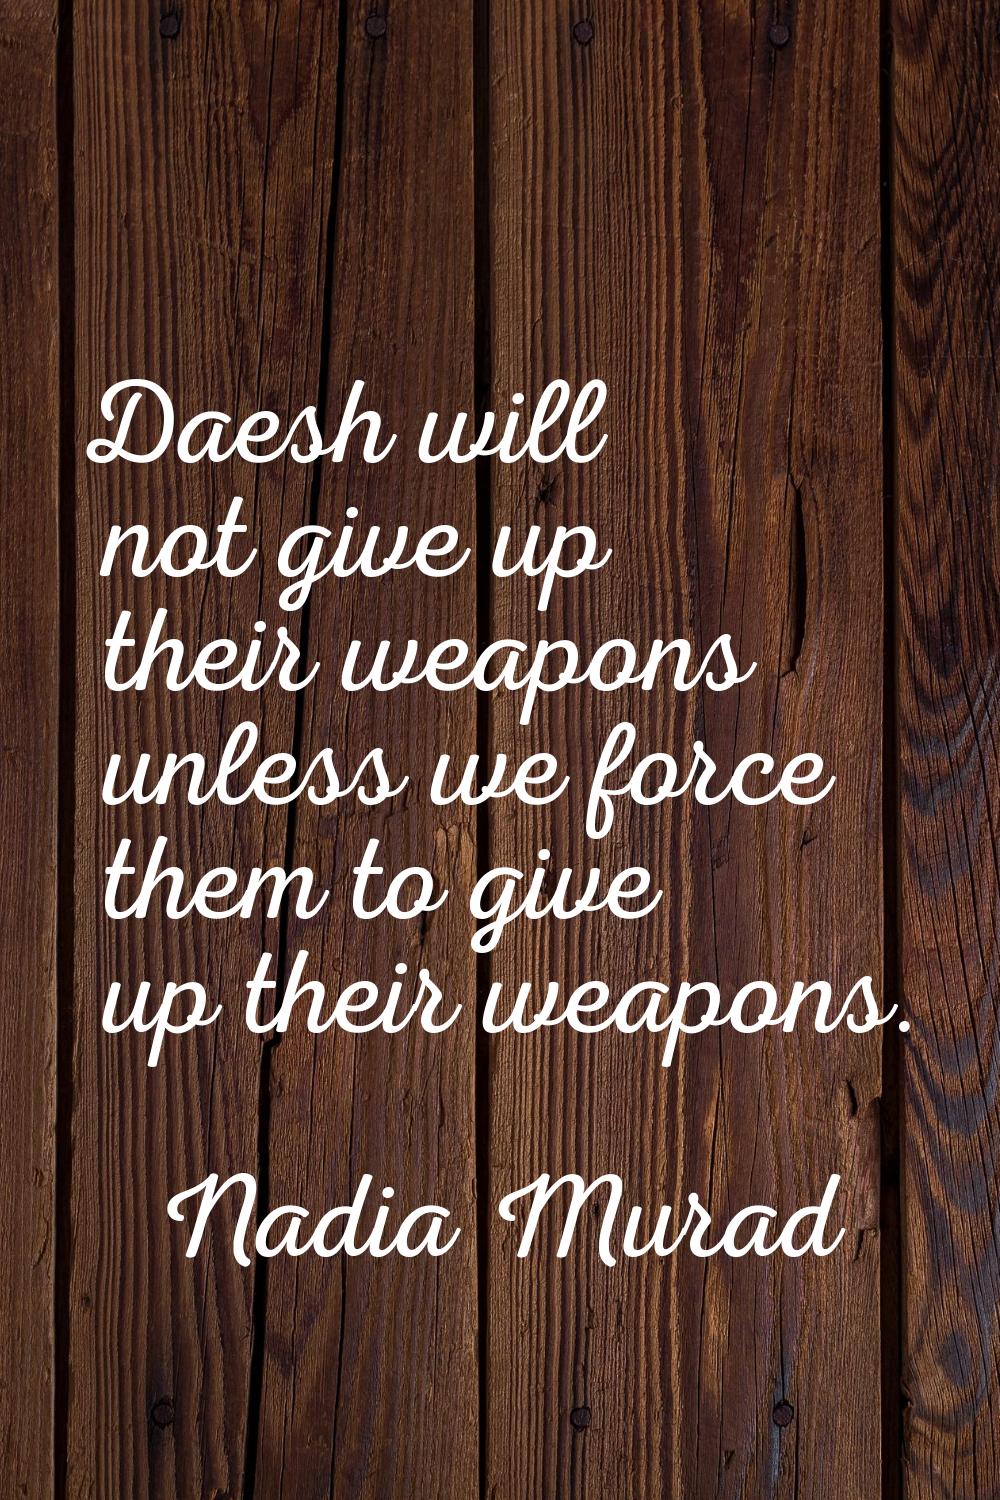 Daesh will not give up their weapons unless we force them to give up their weapons.